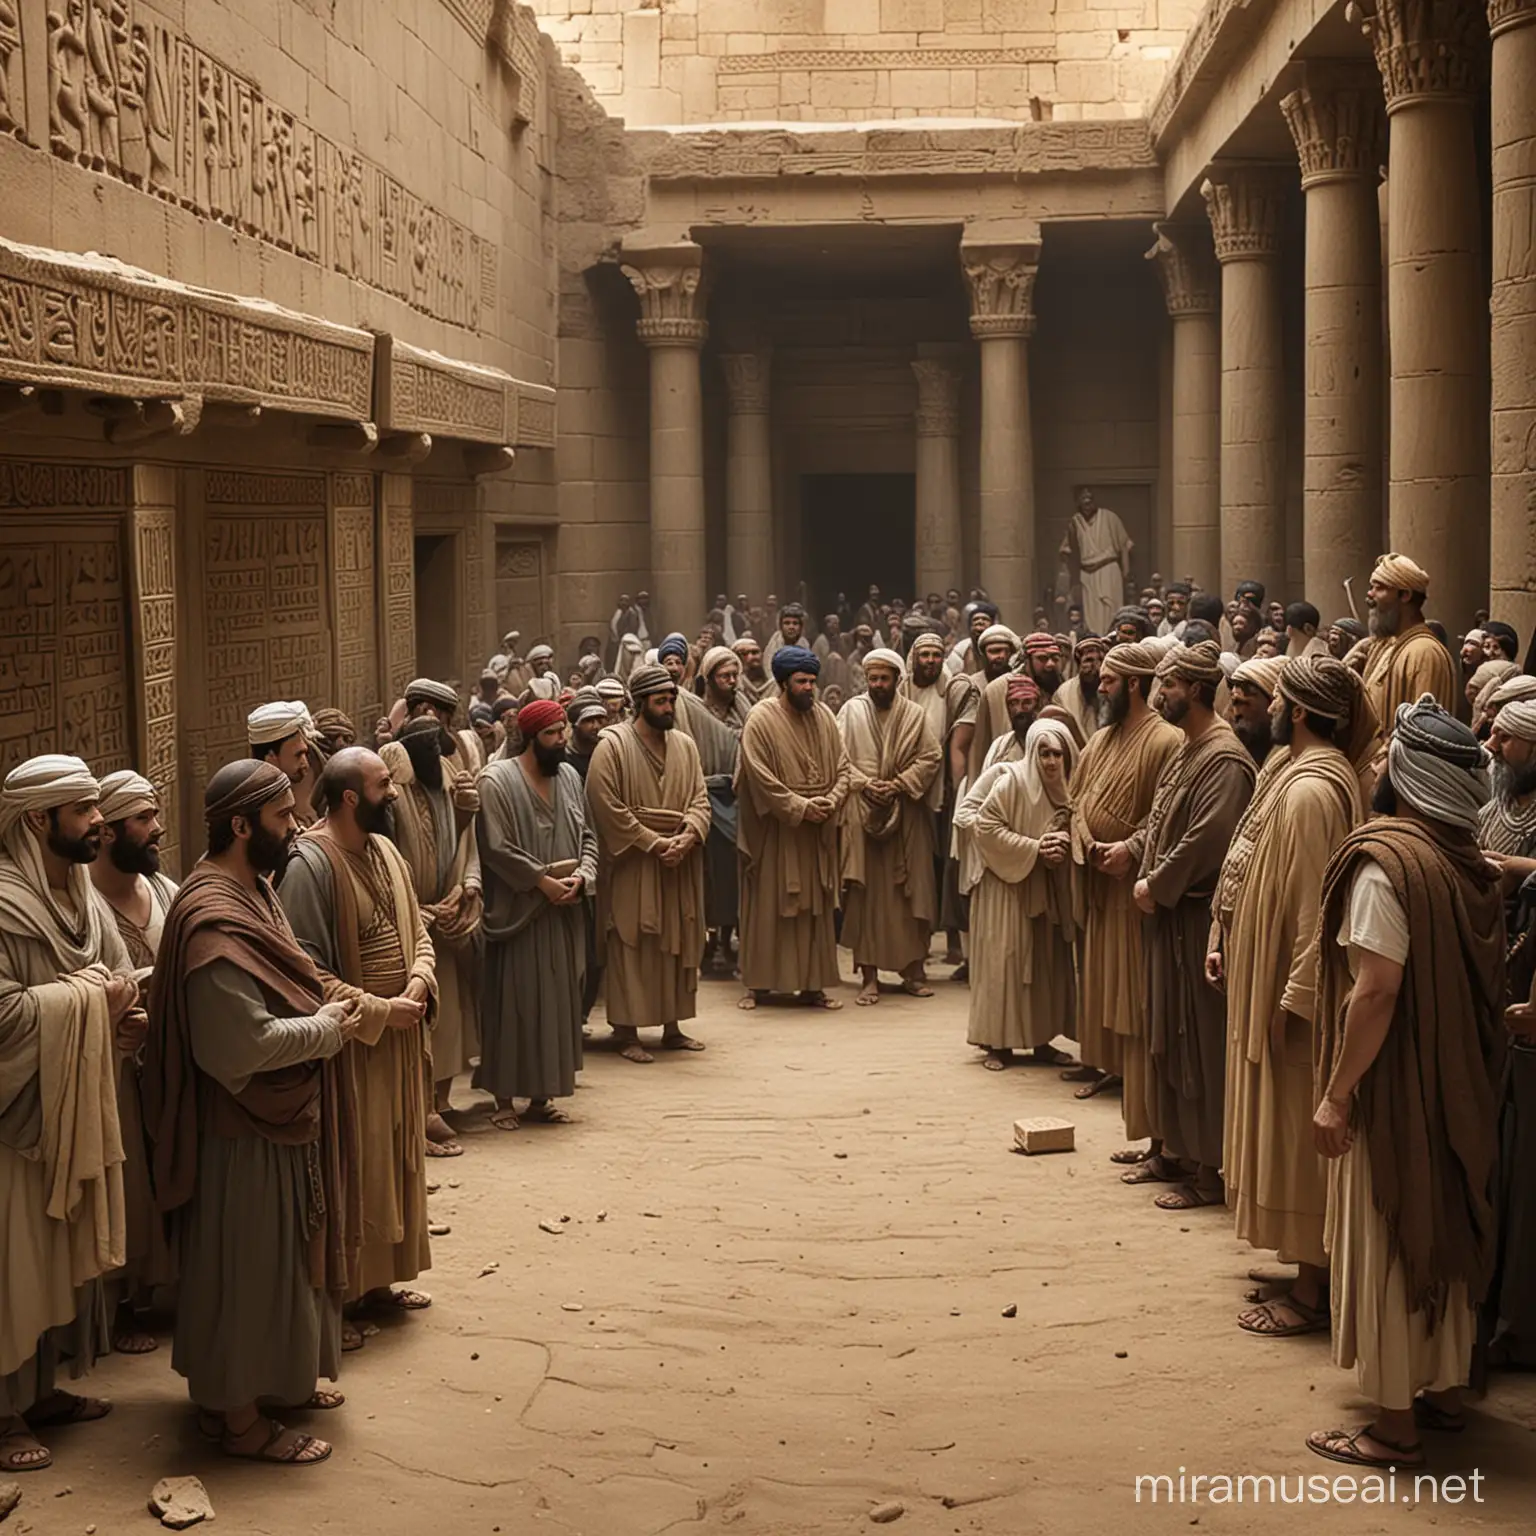 Marketplace Justice: Create a scene set in a bustling Babylonian marketplace where a dispute arises between a merchant and a customer. Show Hammurabi's code being invoked as a wise elder or judge listens to both sides, with bystanders watching anxiously.